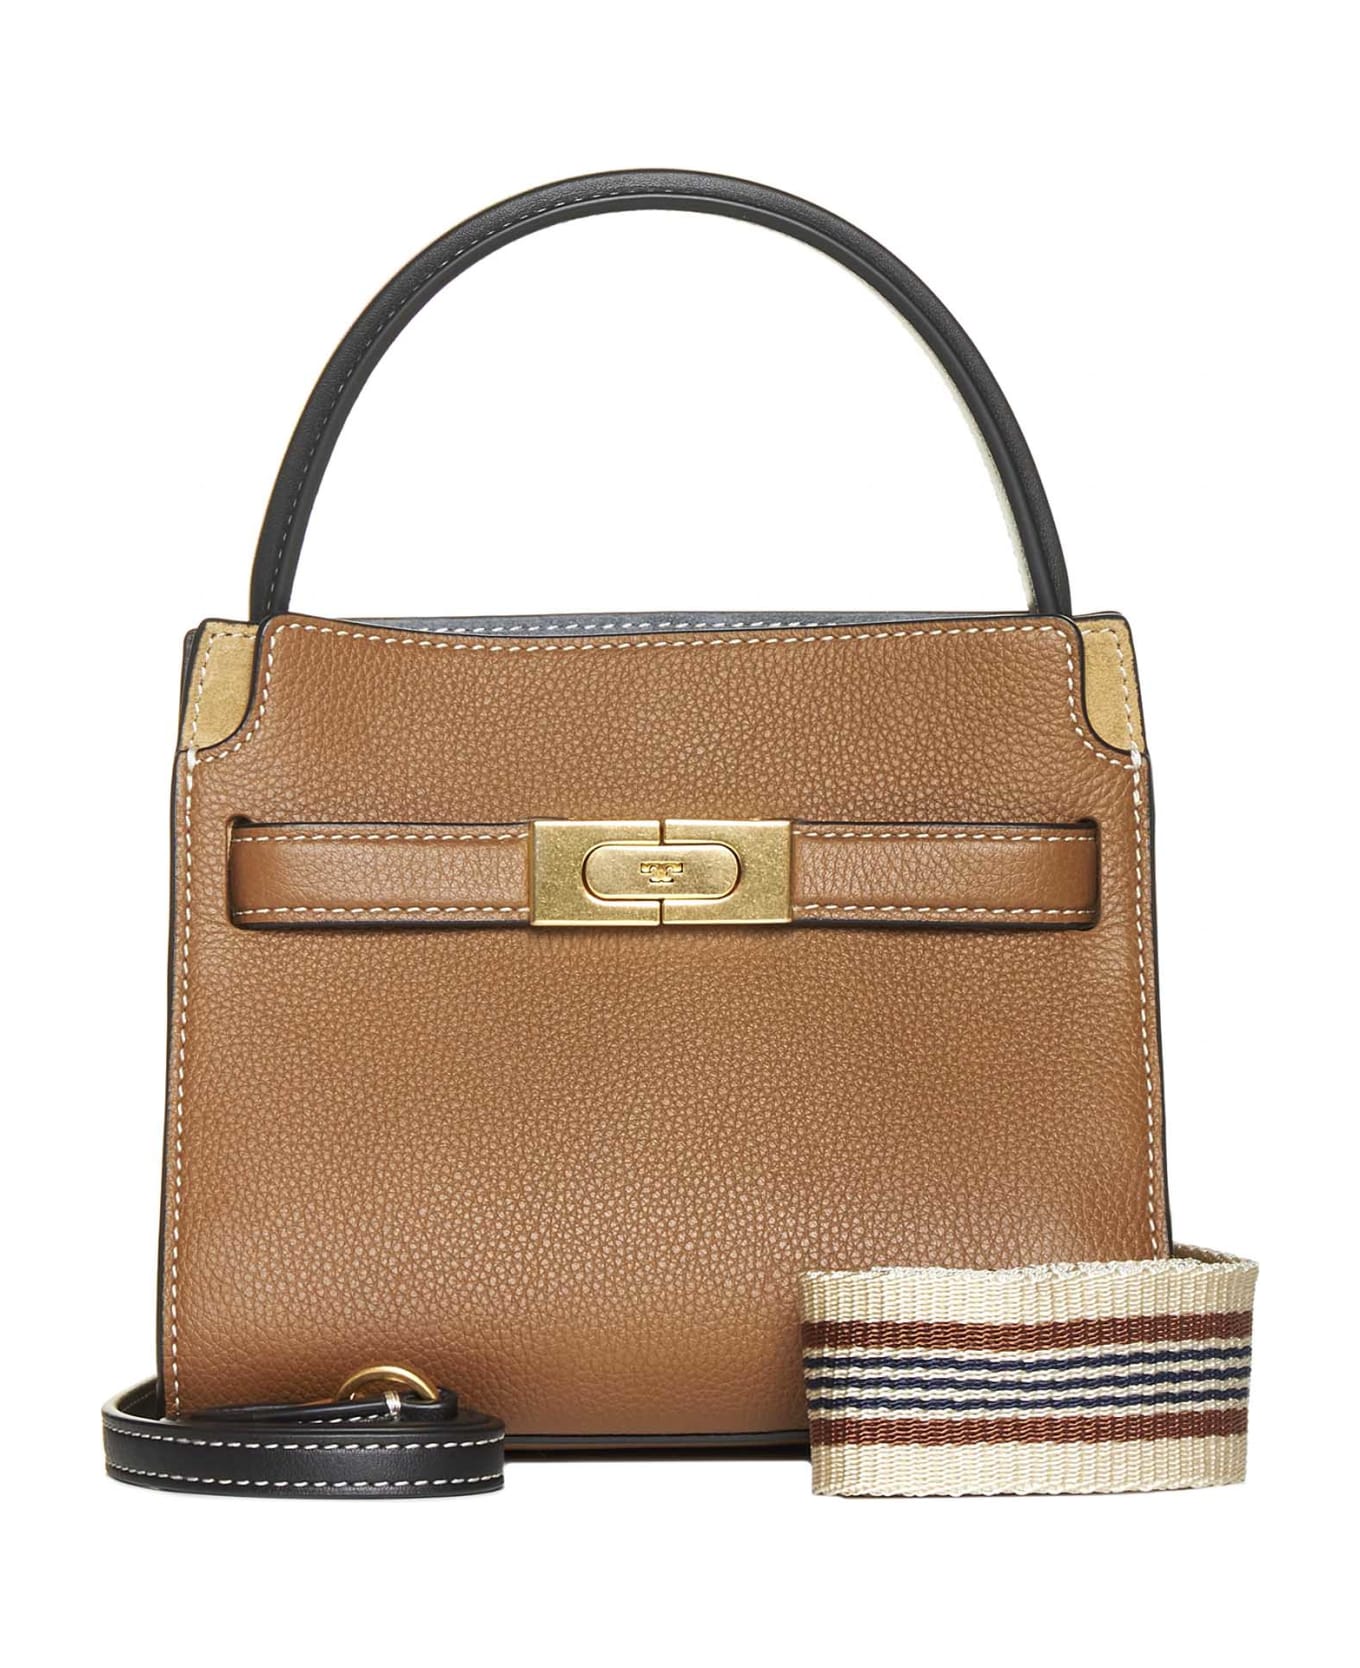 Tory Burch Lee Radziwill Double Bag - Brown